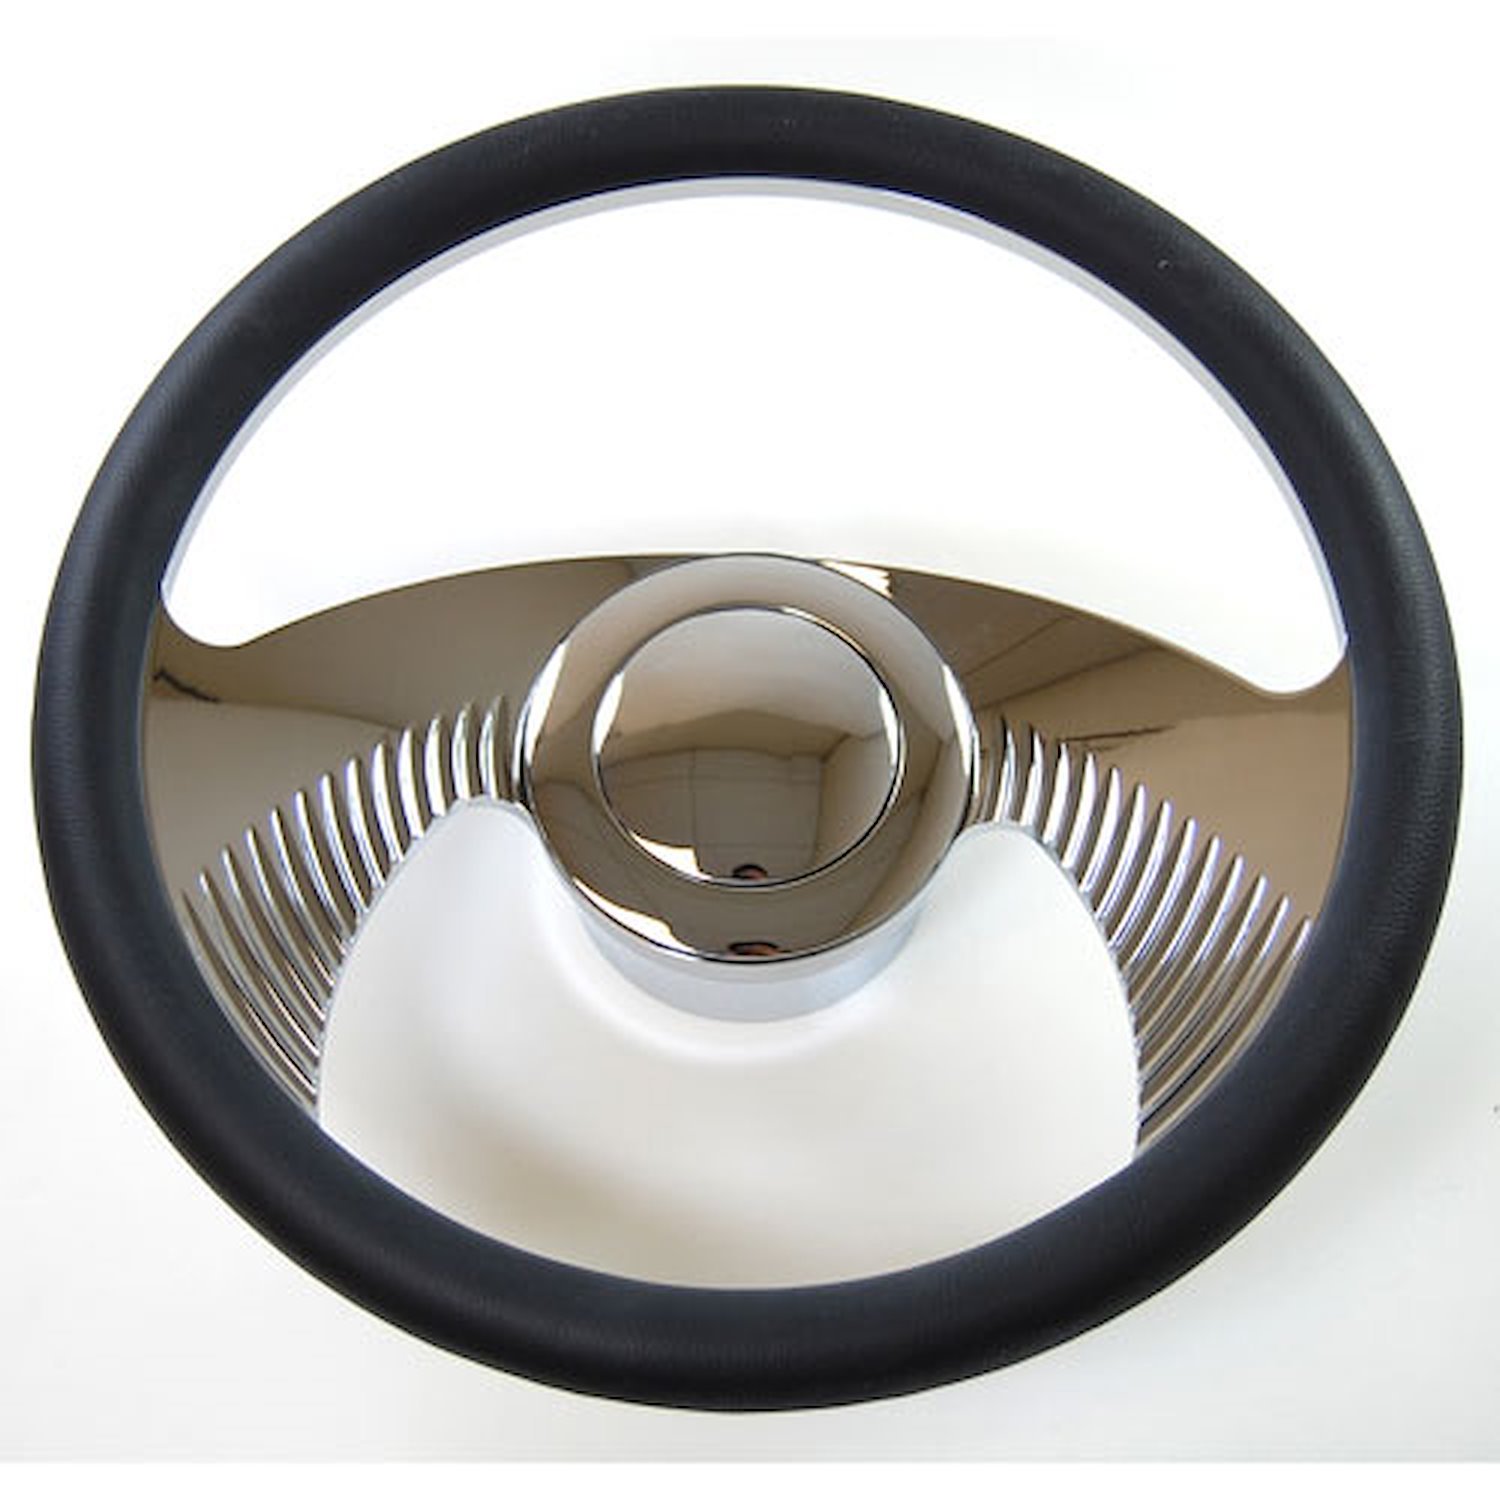 14 CHROME BILLET WINGS STYLE STEERING WHEEL WITH